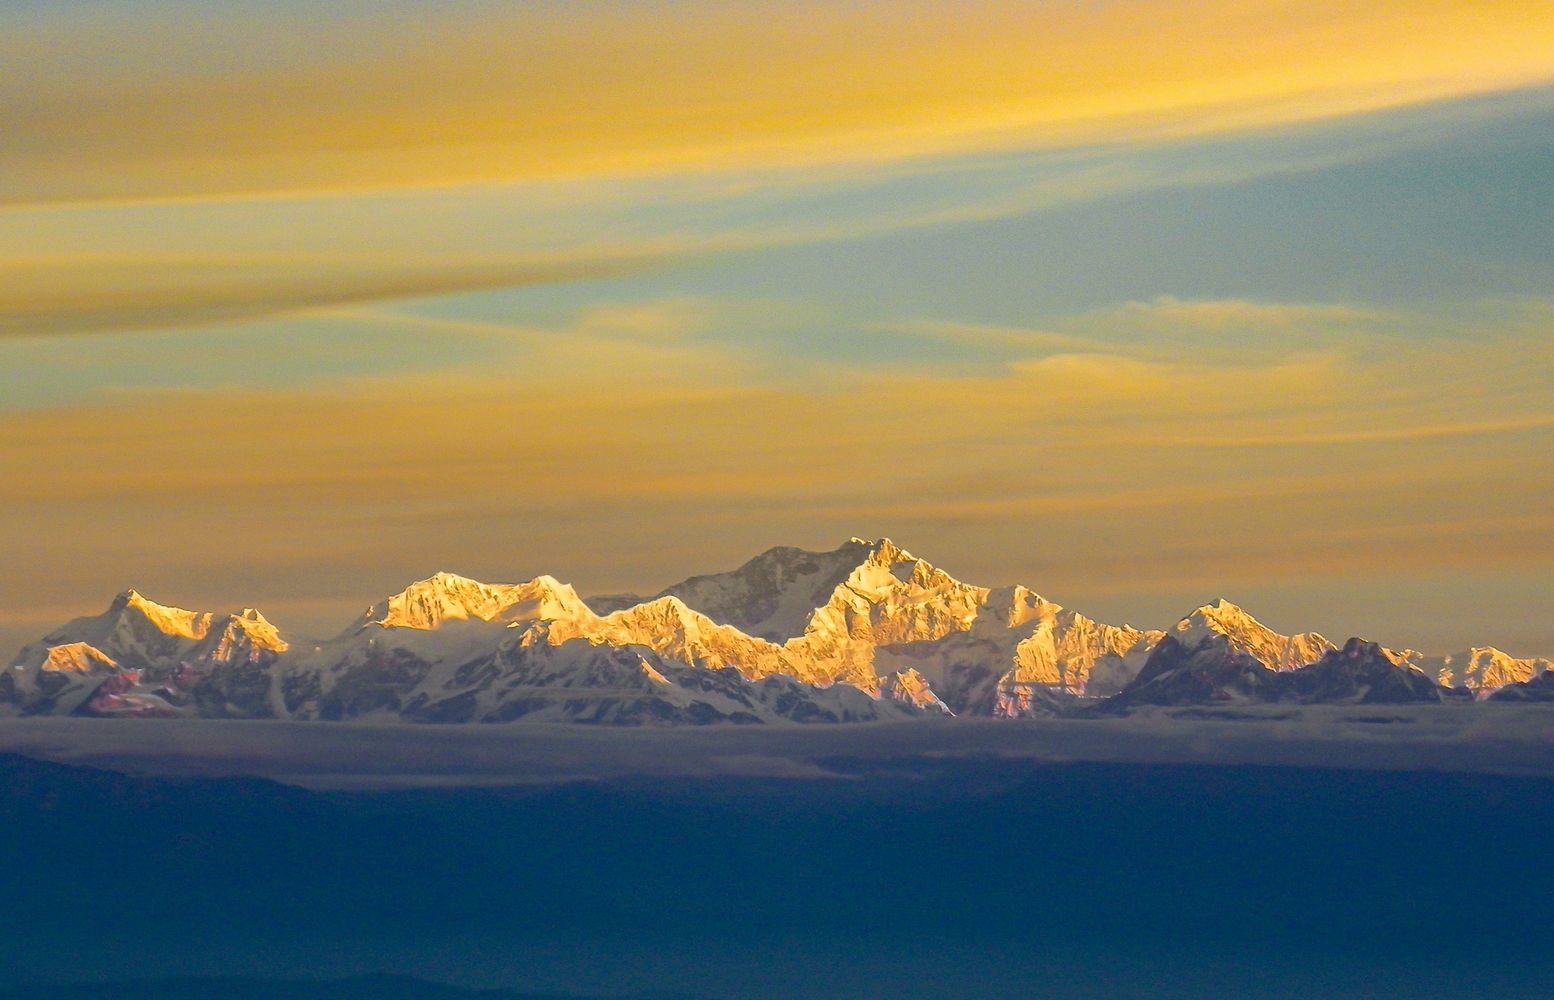 Kanchenjunga North East Tourism Pvt. Ltd. promotes Northeast India's diverse attractions for travel.